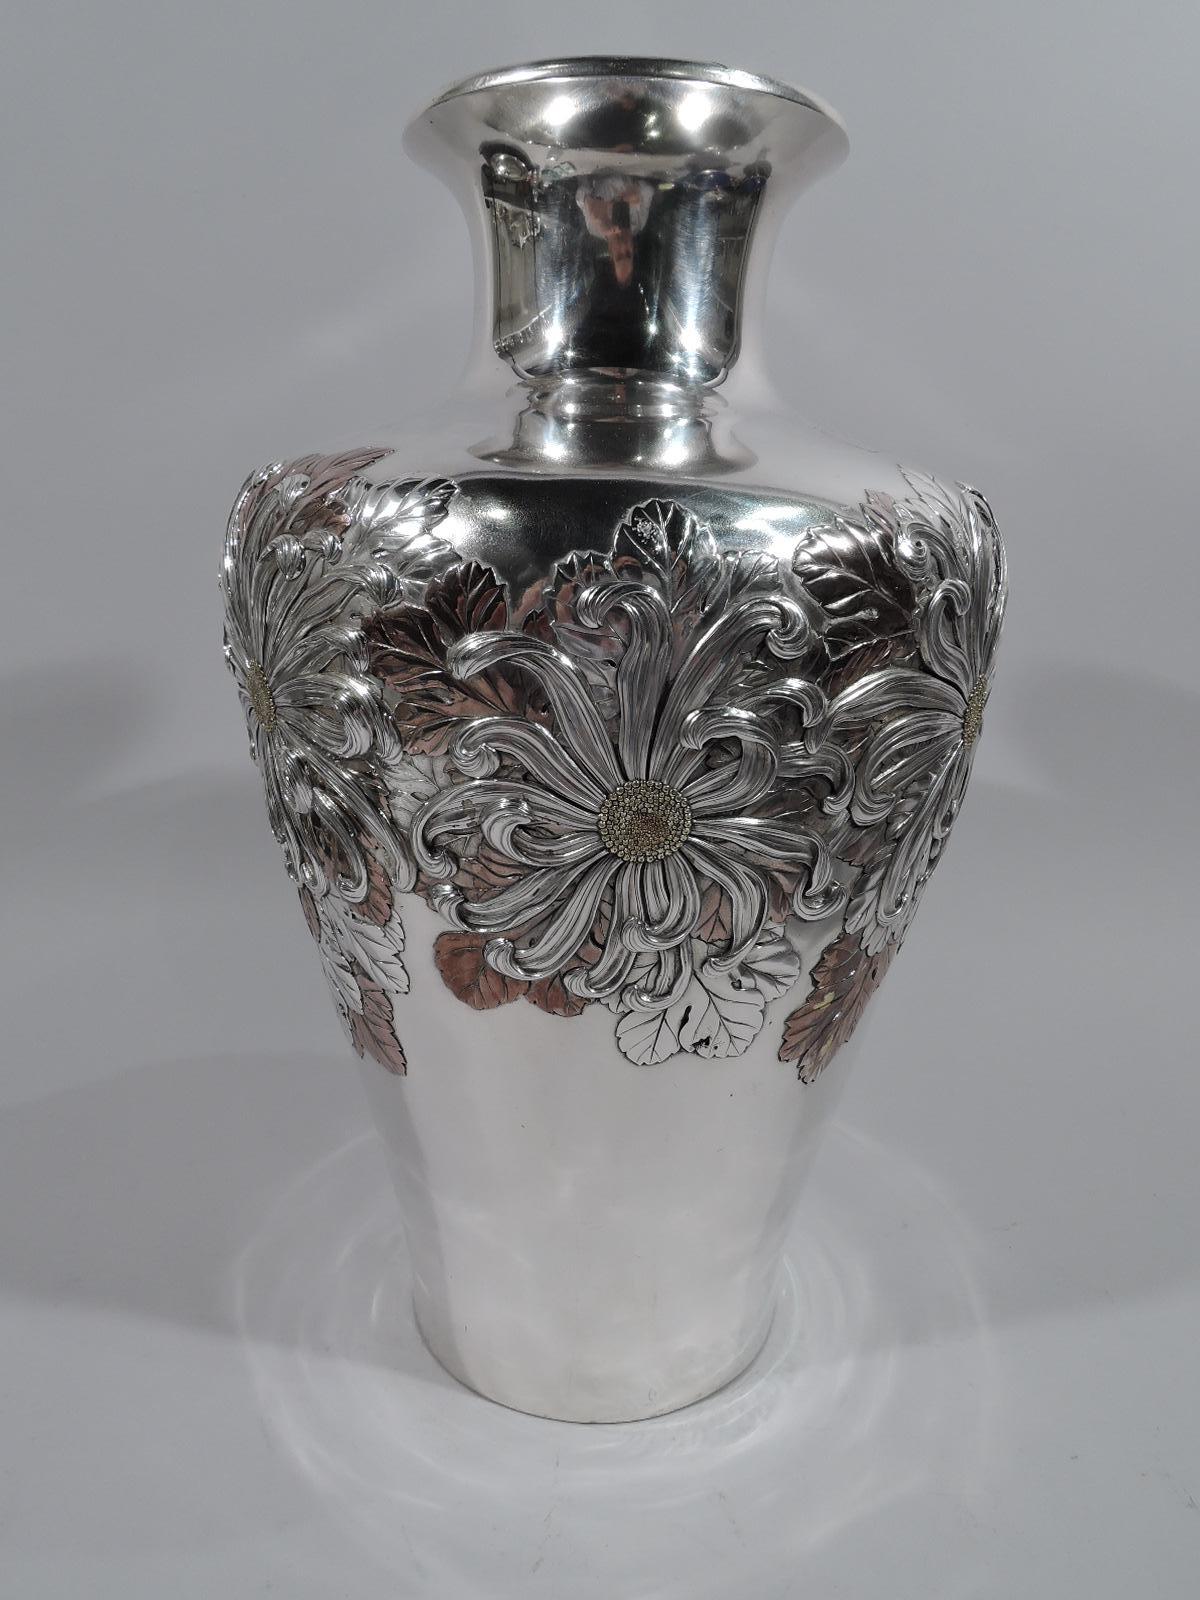 Large Japanese mixed metal on silver vase, circa 1880. Tapering with round shoulder and short spool neck. Applied ornament in silver, gold, and copper: Chrysanthemums—big bold blooms with fluid whiplash petals—on overlapping leaves. Wonderful